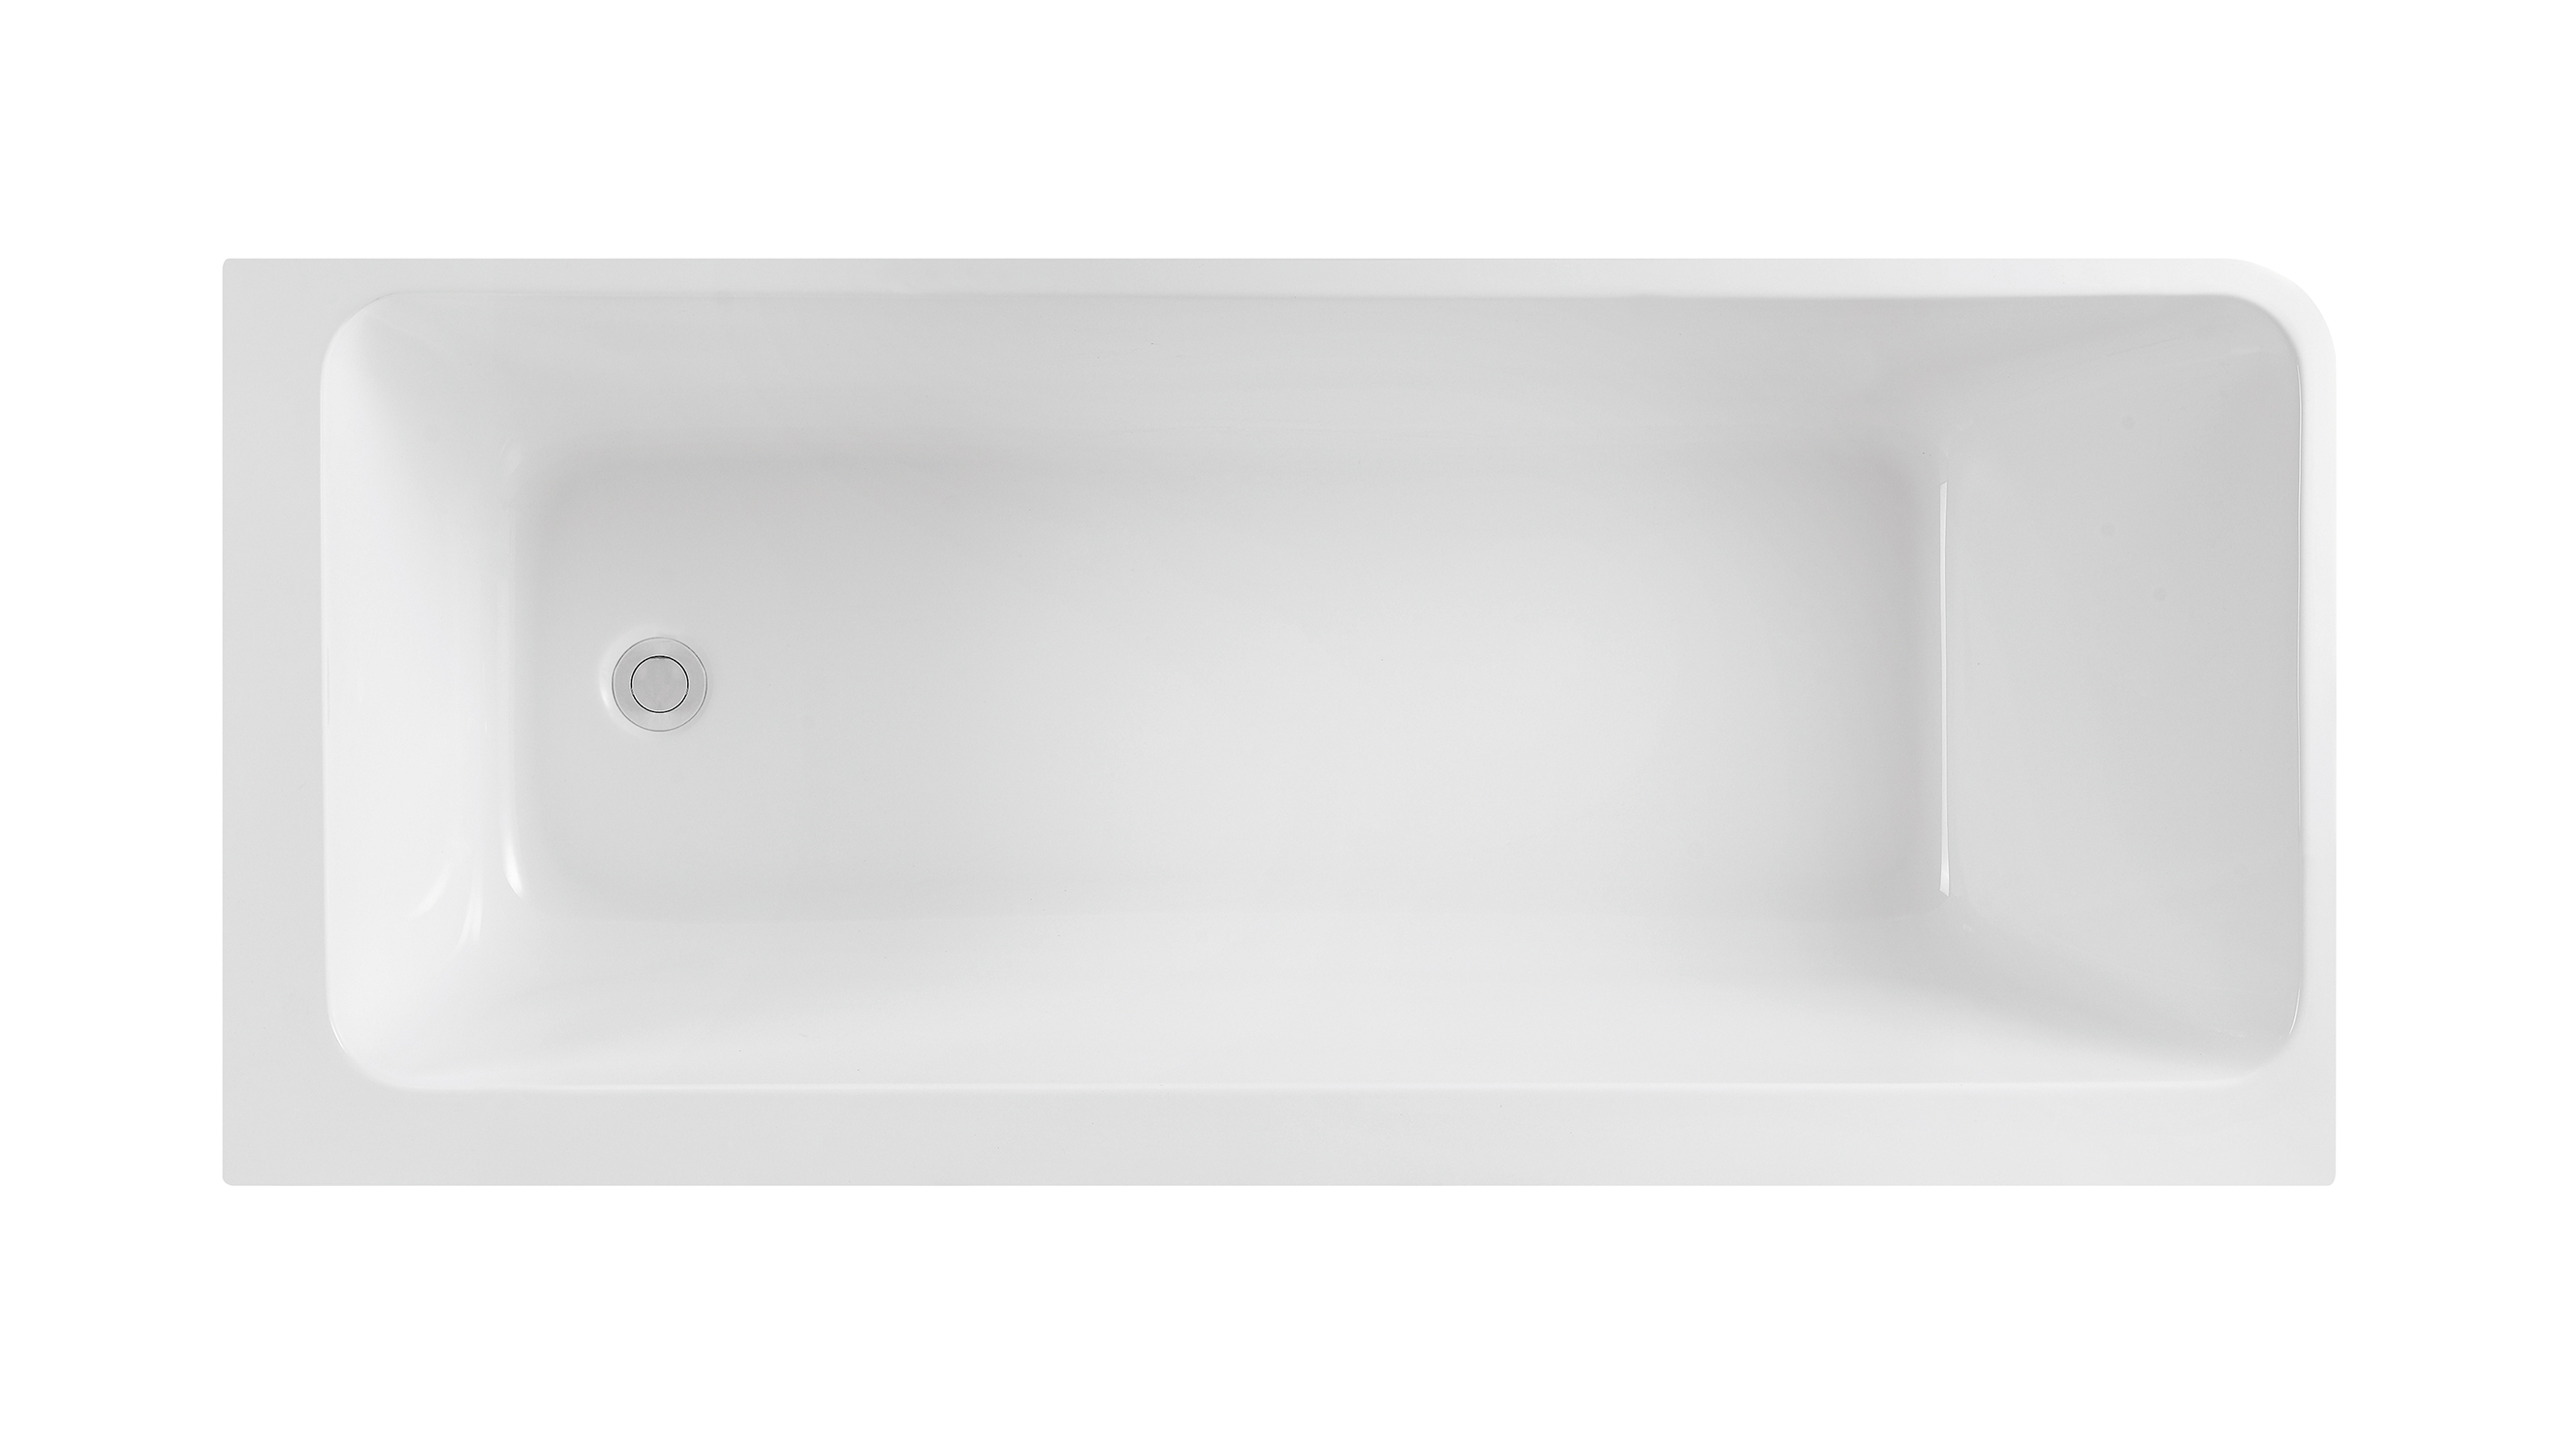 POSEIDON GLOSS WHITE AVIS RIGHT CORNER BACK TO WALL BATHTUB (AVAILABLE IN 1500MM AND 1700MM)